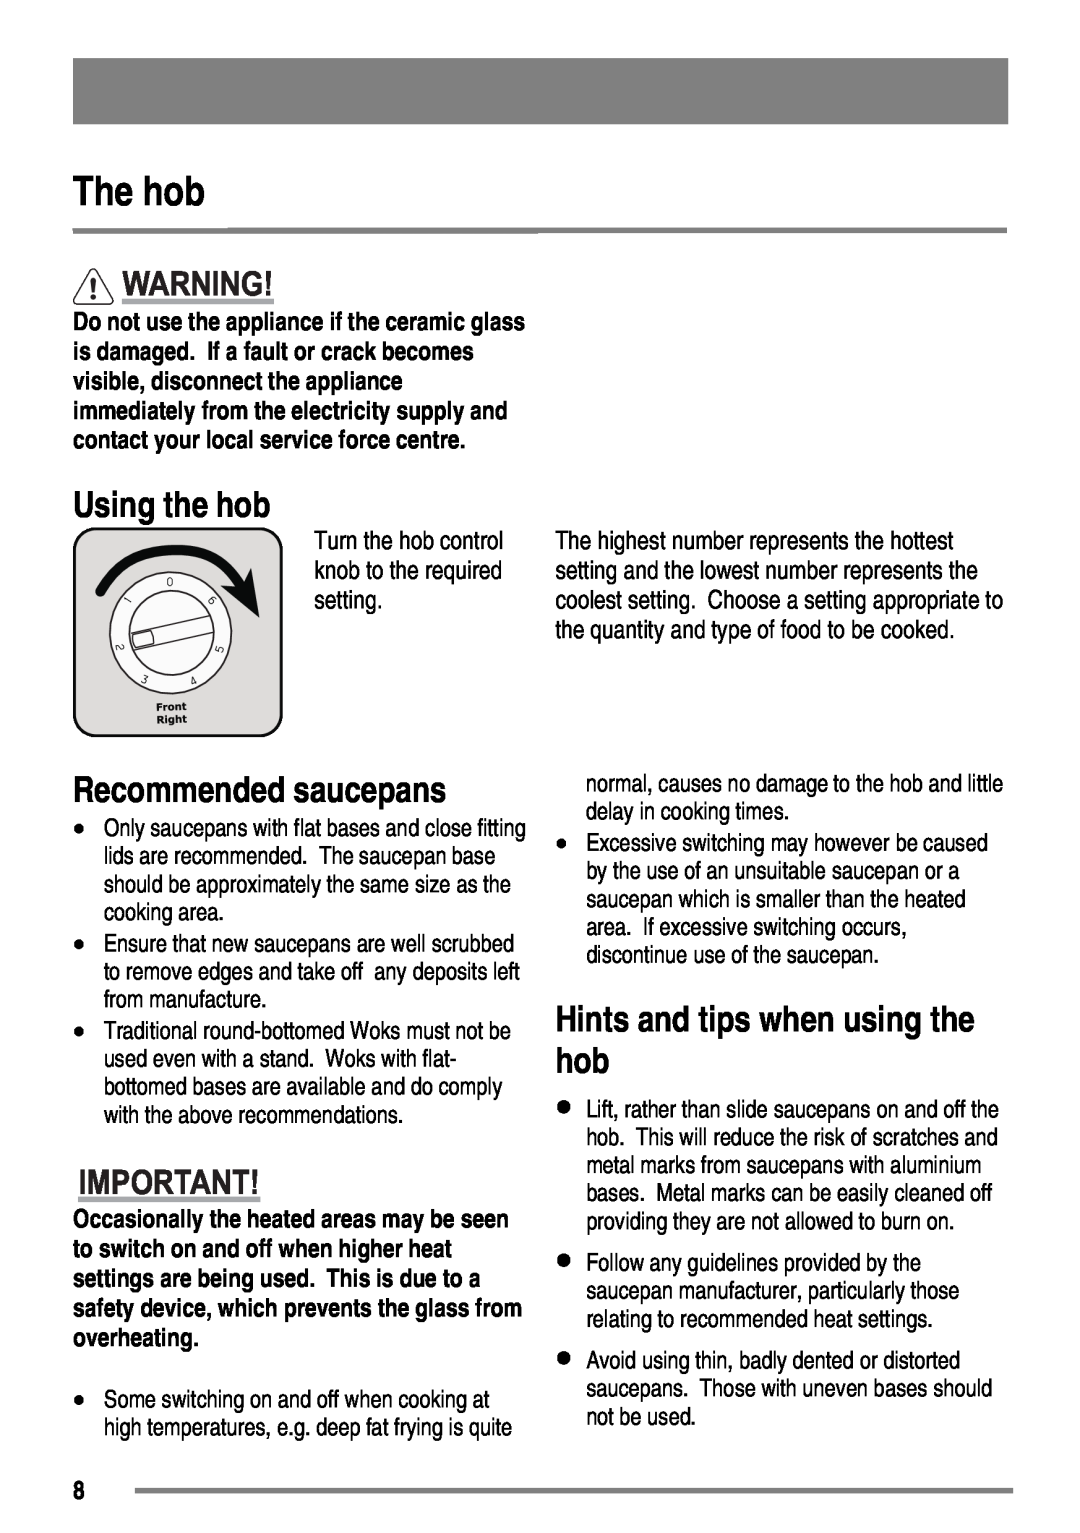 Zanussi ZKC6010 user manual The hob, Using the hob, Recommended saucepans, Hints and tips when using the hob 